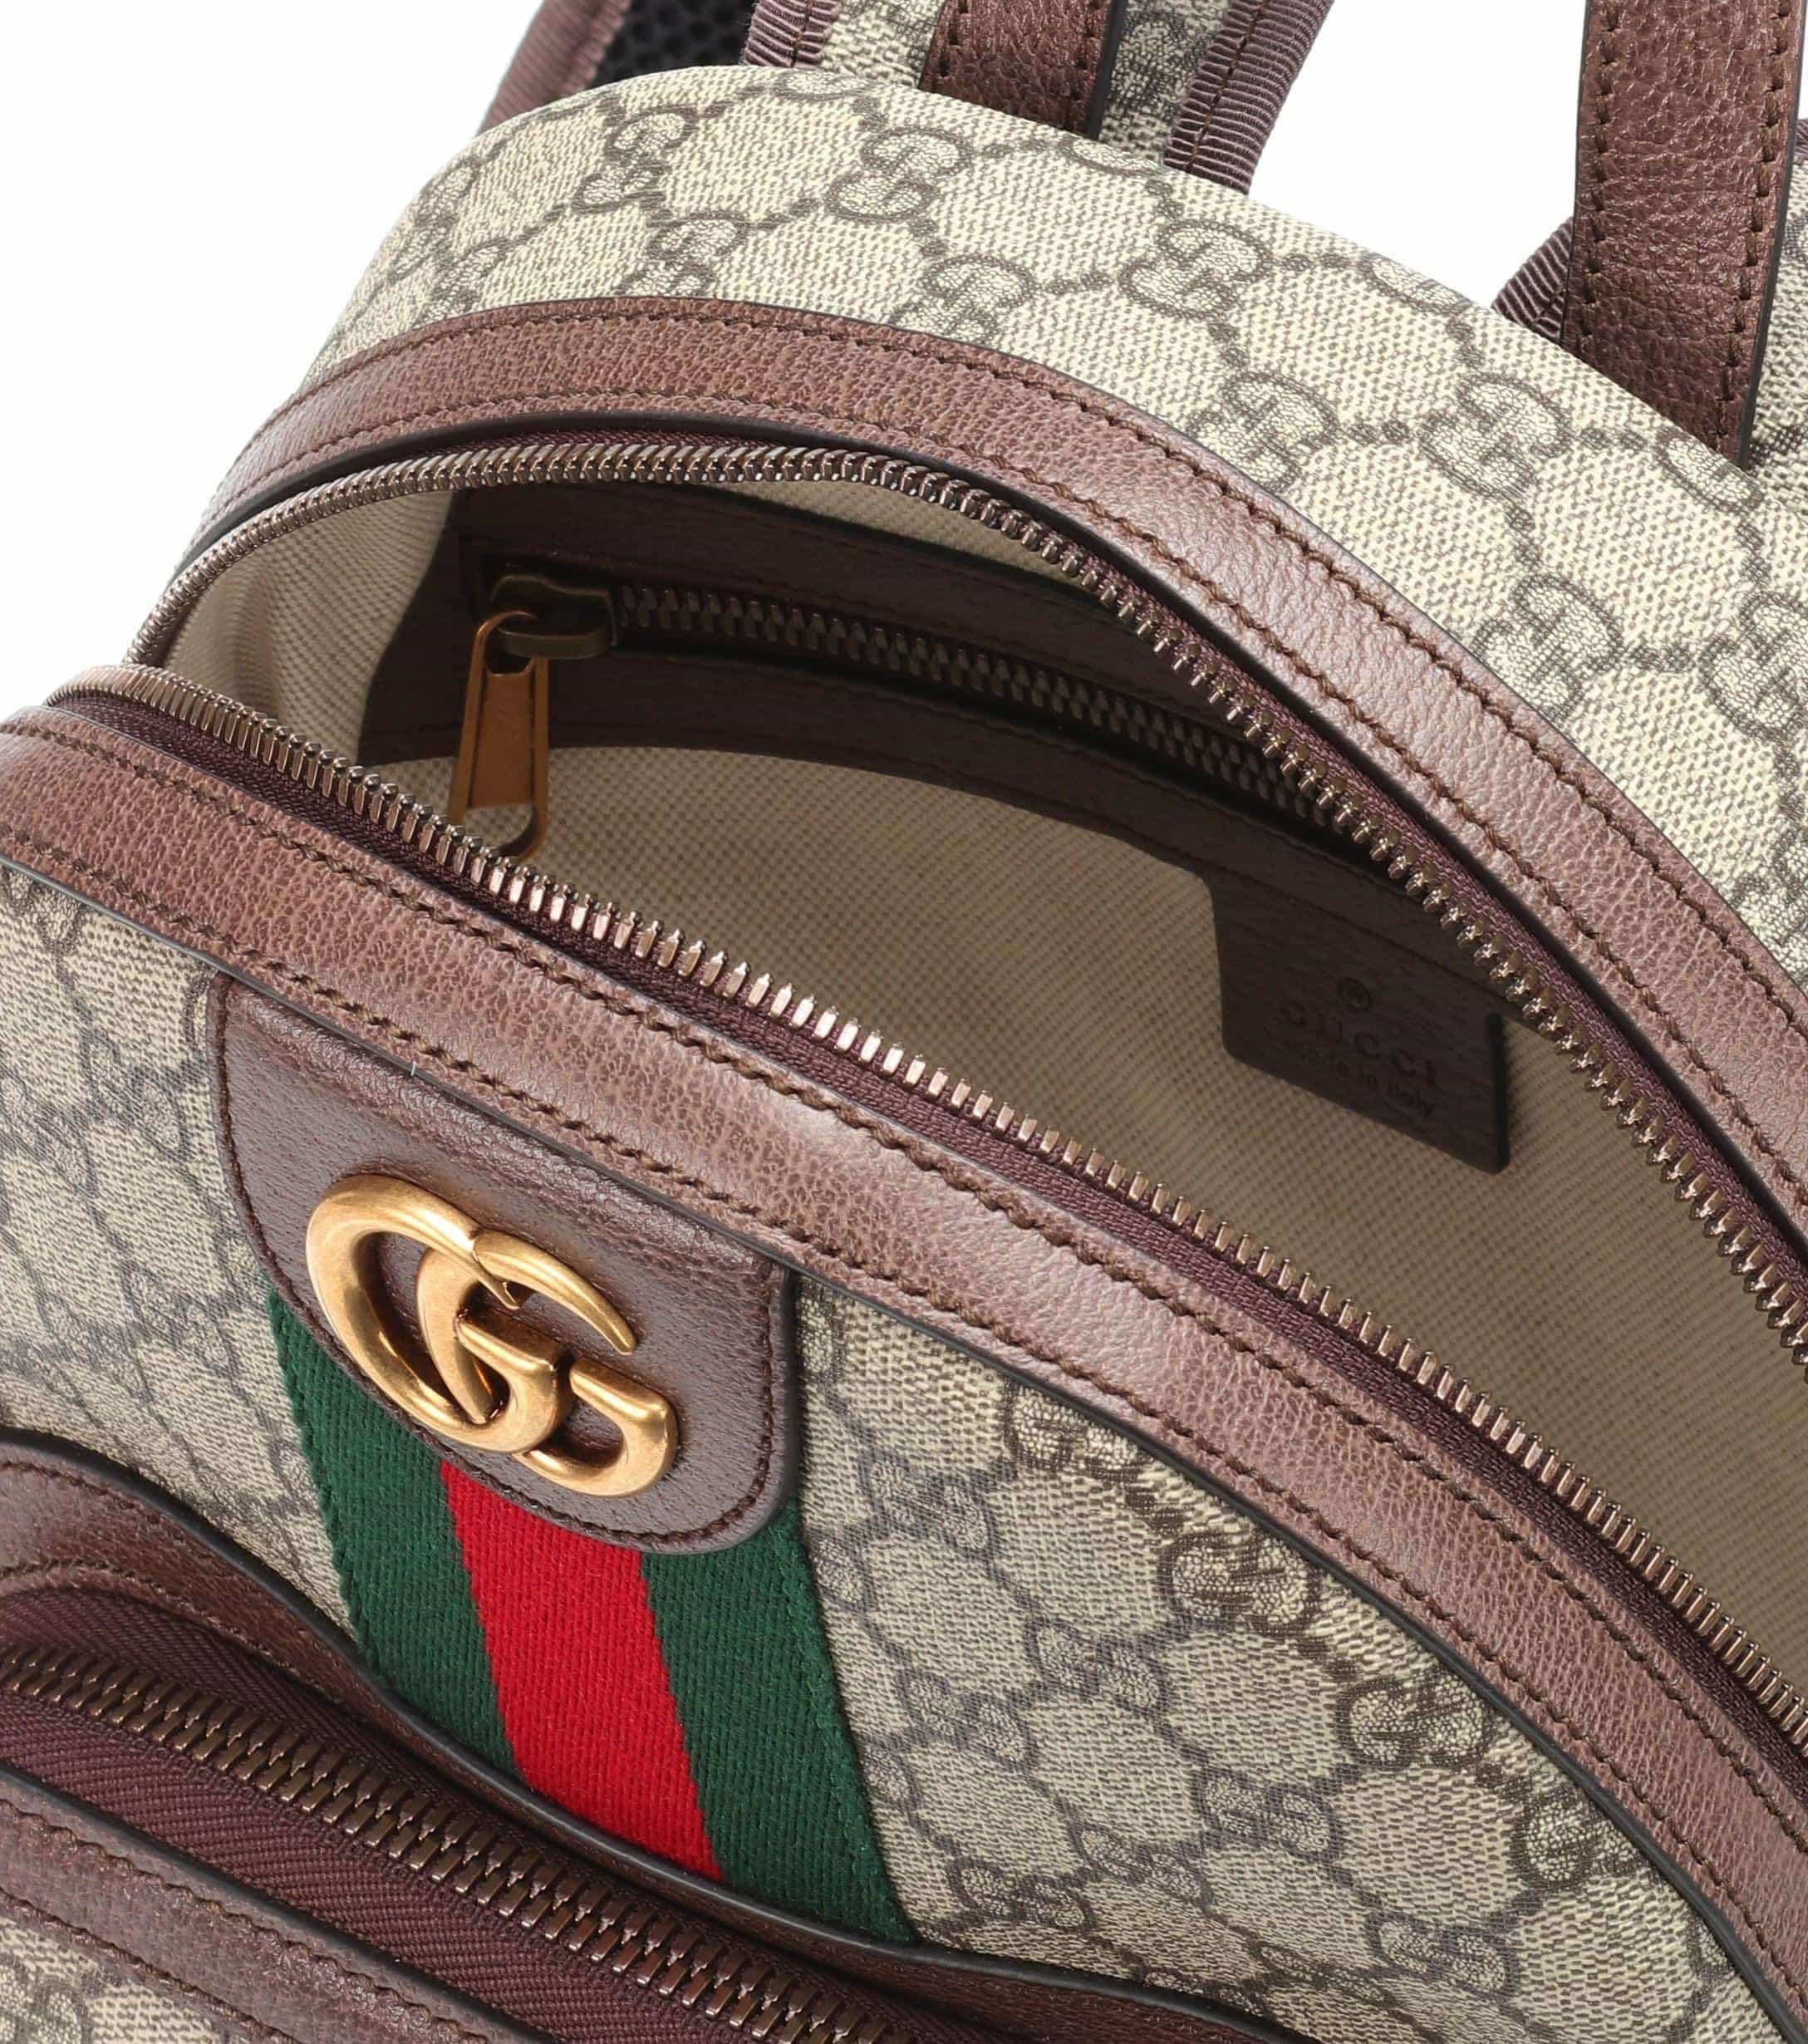 BALO UNISEX GUCCI OPHIDIA GG SMALL BACKPACK 23